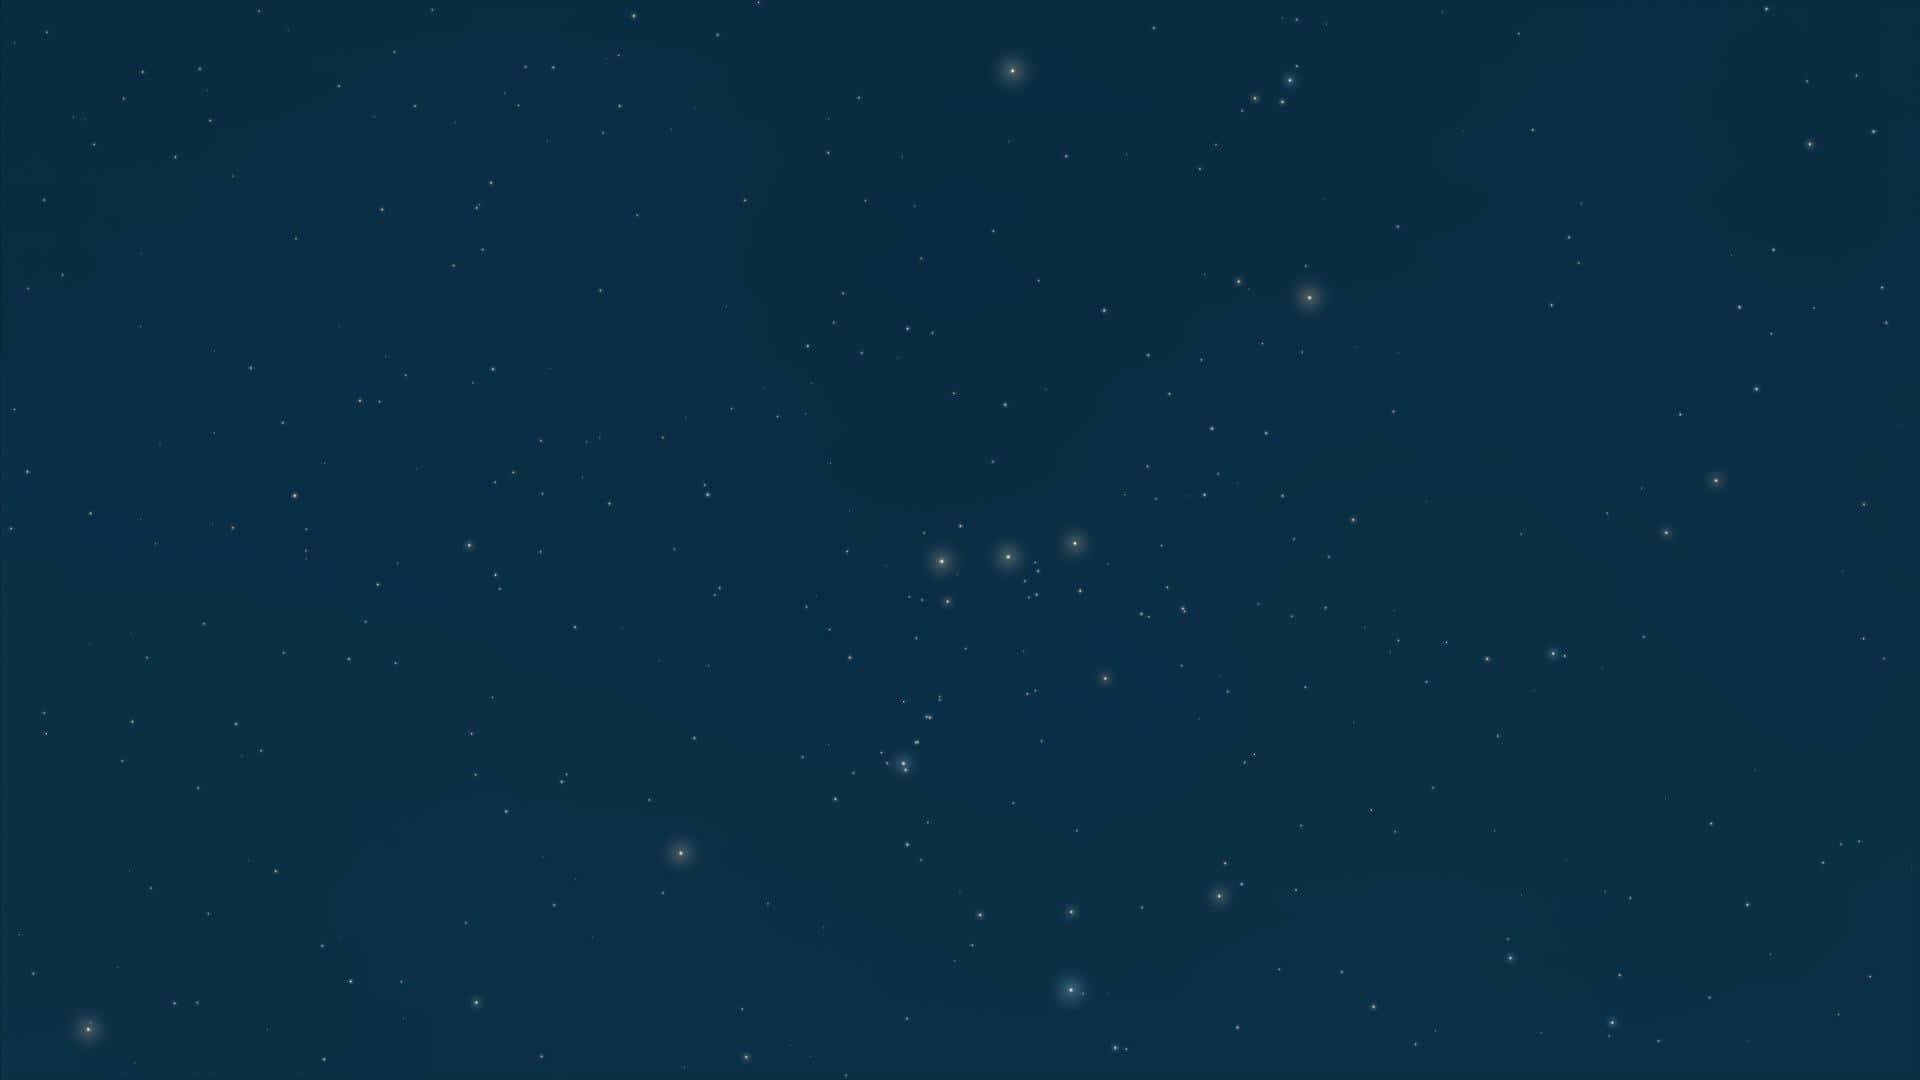 Visible Stars In Blue Sky Wallpaper